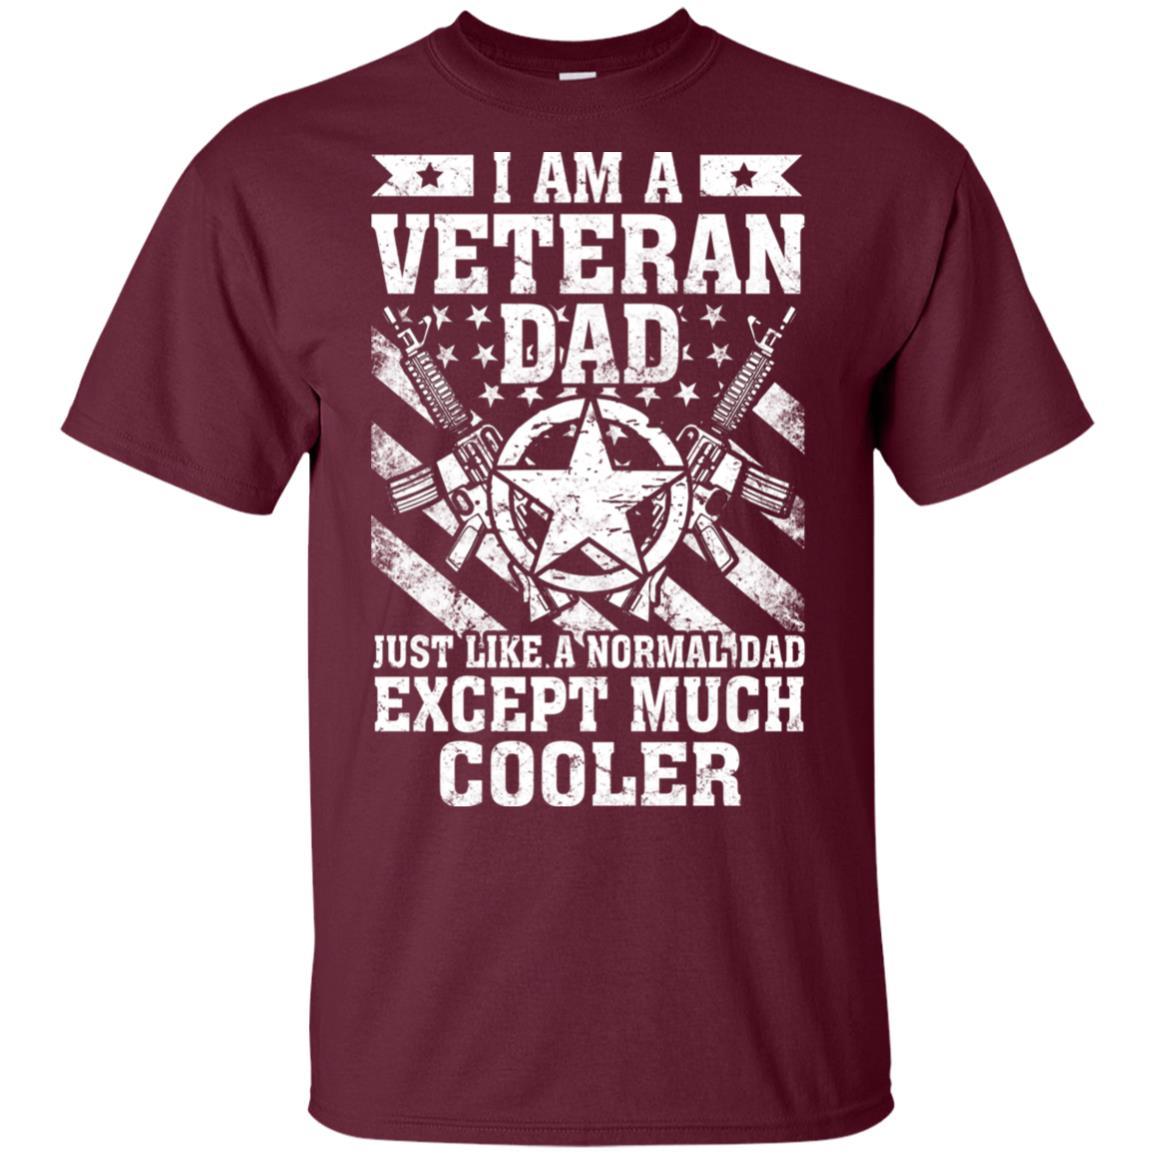 Military T-Shirt "I Am A Veteran Dad Just Like A Normal Dad Except Much Cooler On" Front-TShirt-General-Veterans Nation